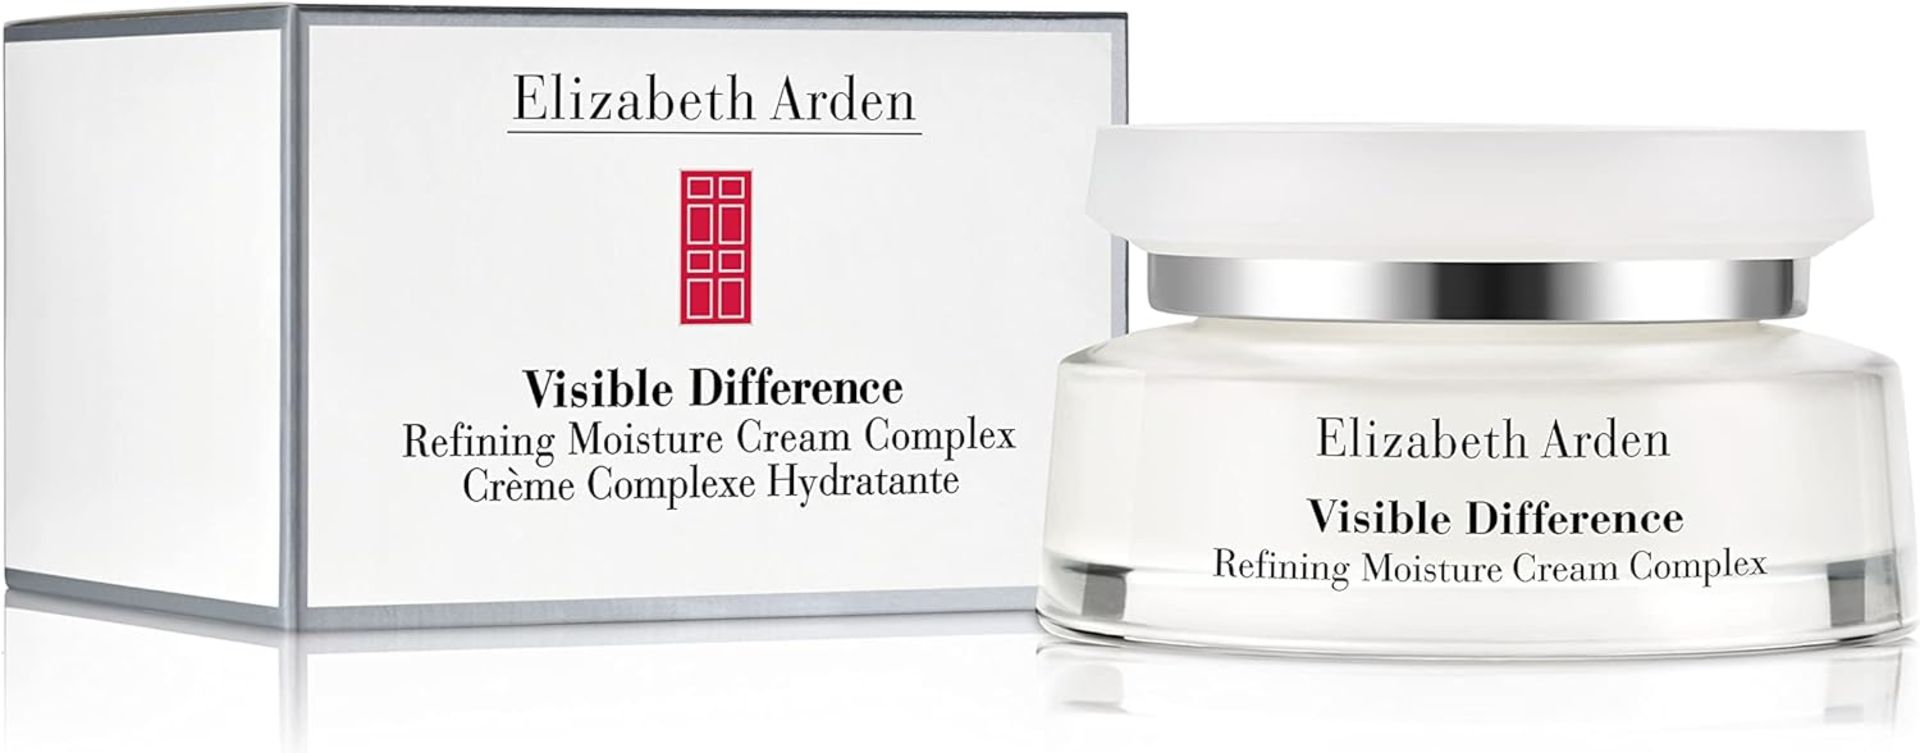 Elizabeth Arden Visible Difference Refining Moisture Cream Complex For Face (75ml) x 5 Jars